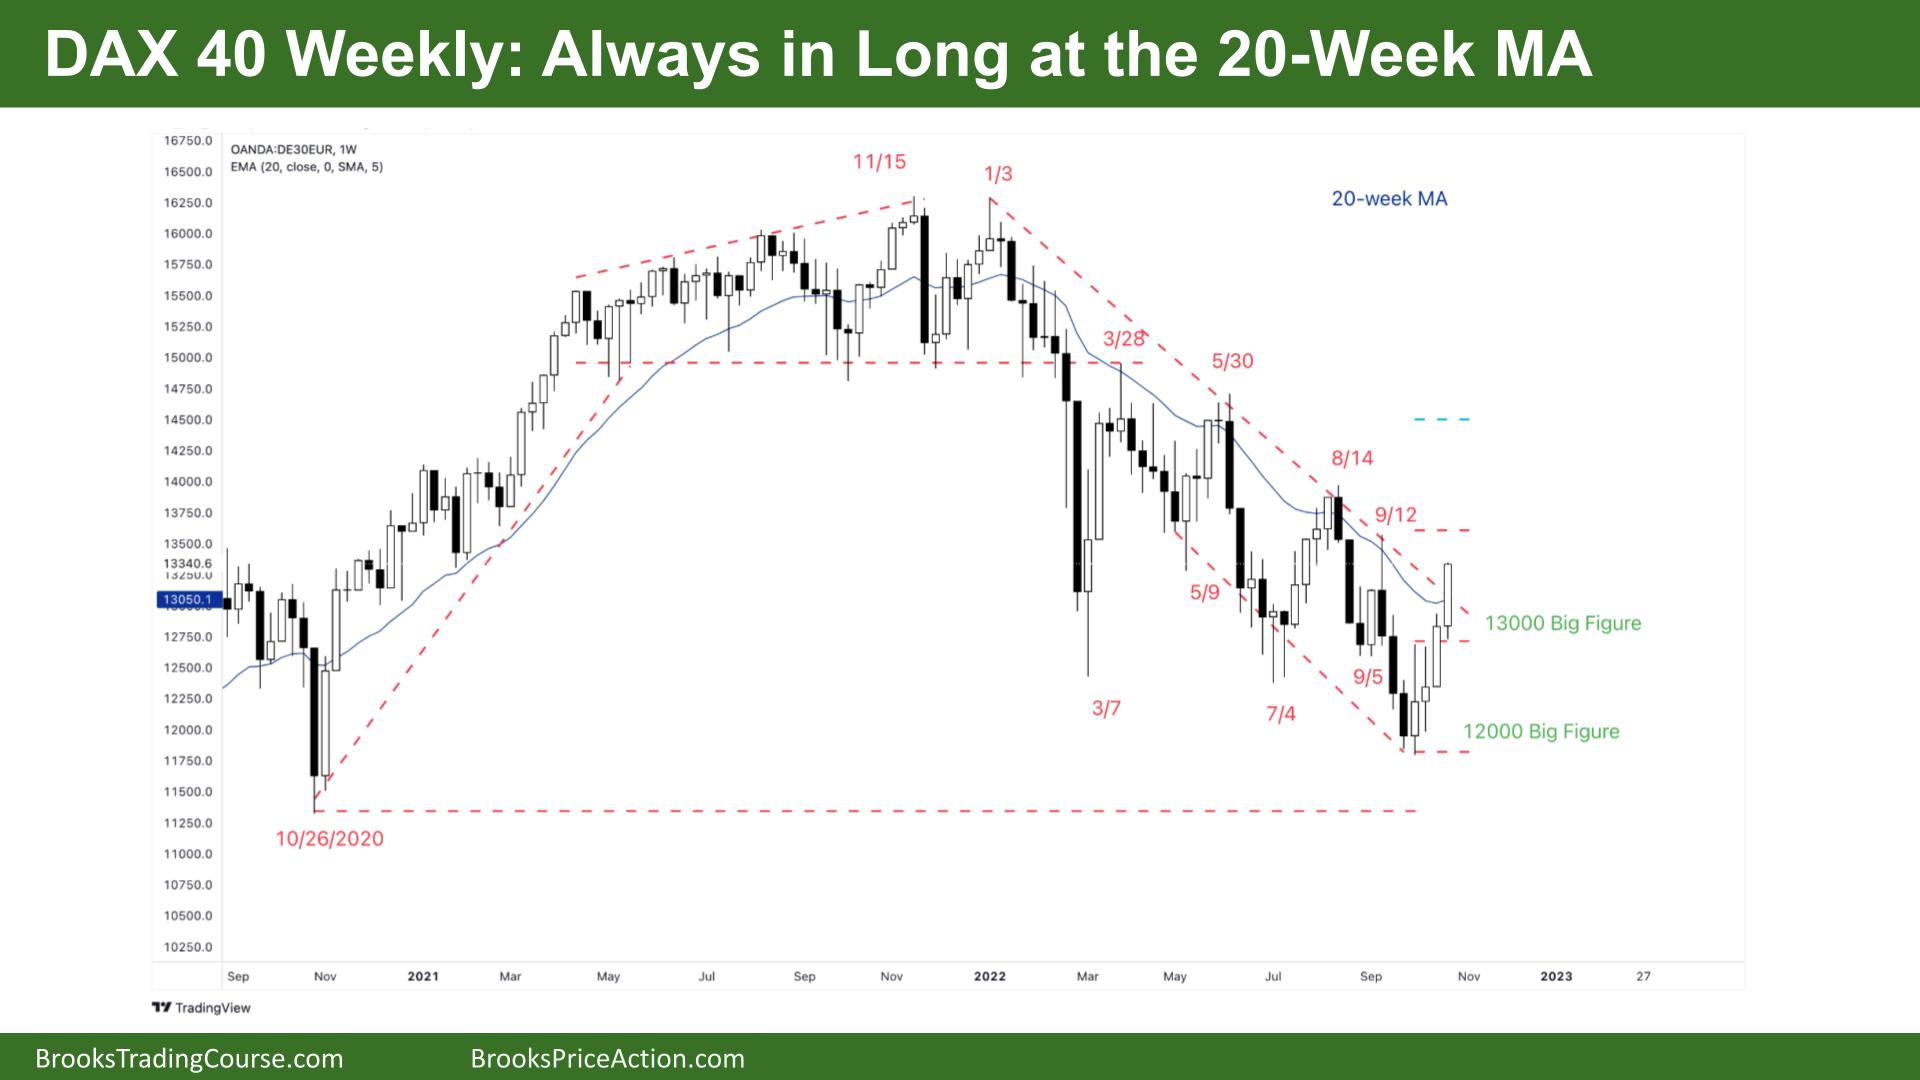 DAX 40 Weekly Chart Always in Long at the 20-Week MA